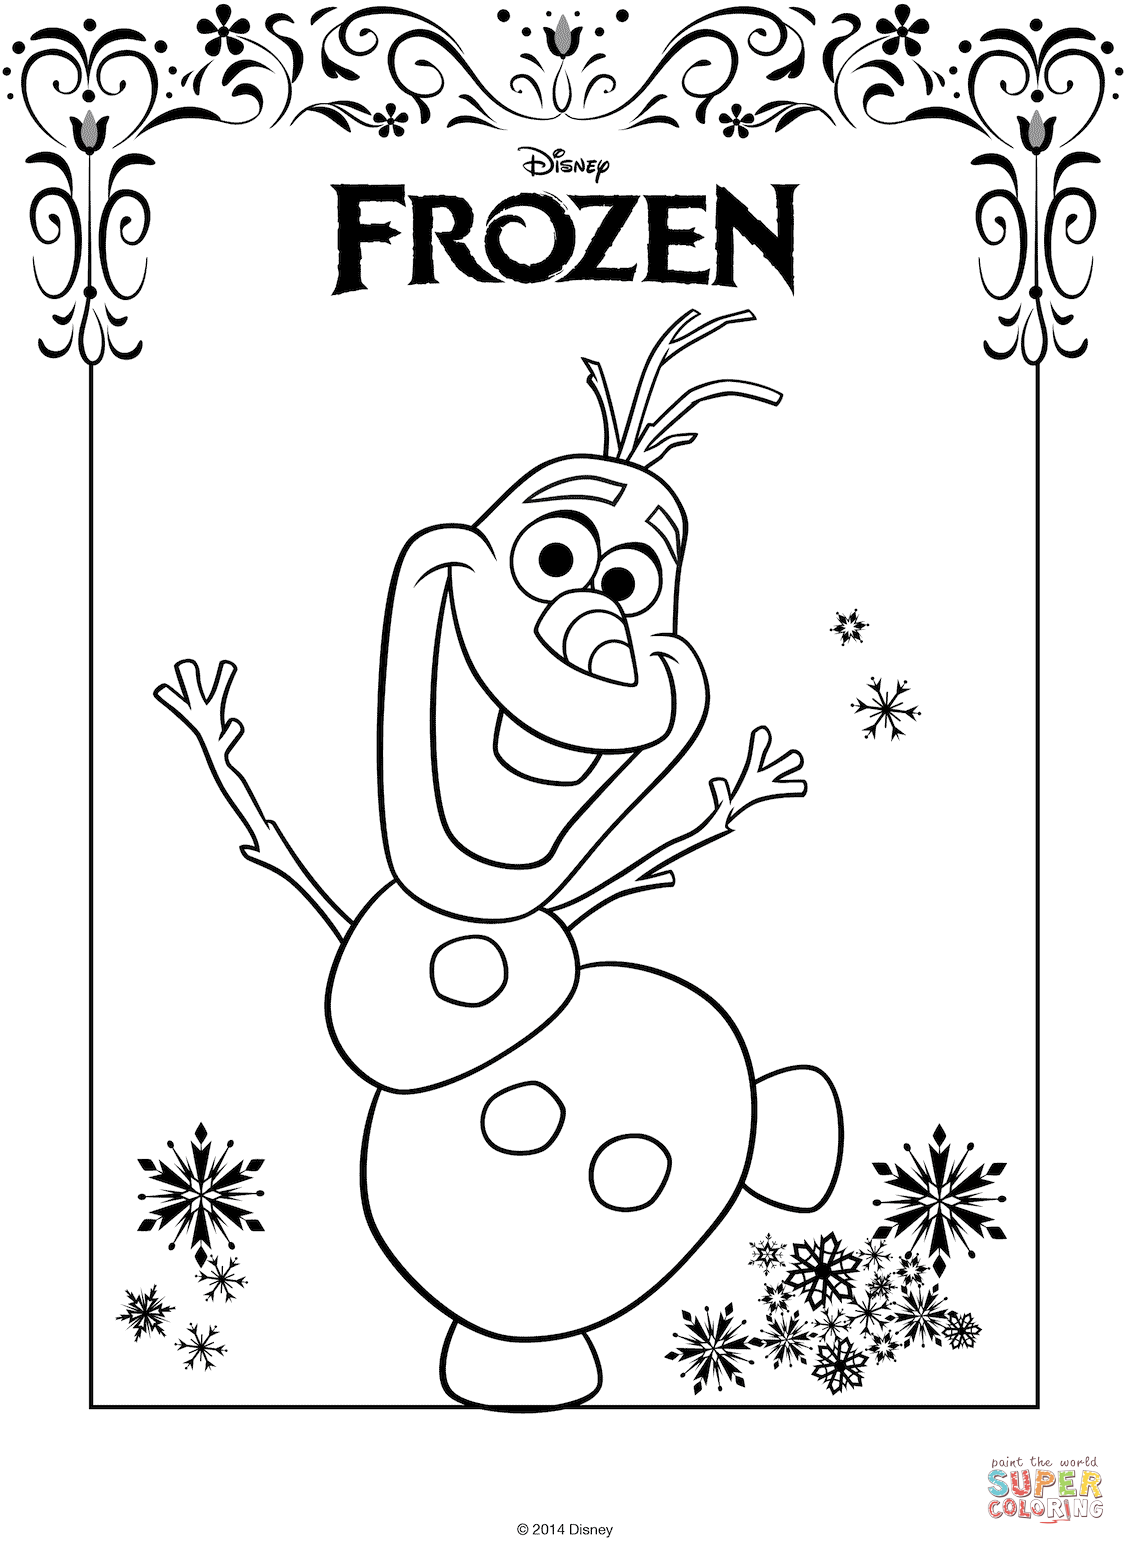 Frozen coloring #3, Download drawings